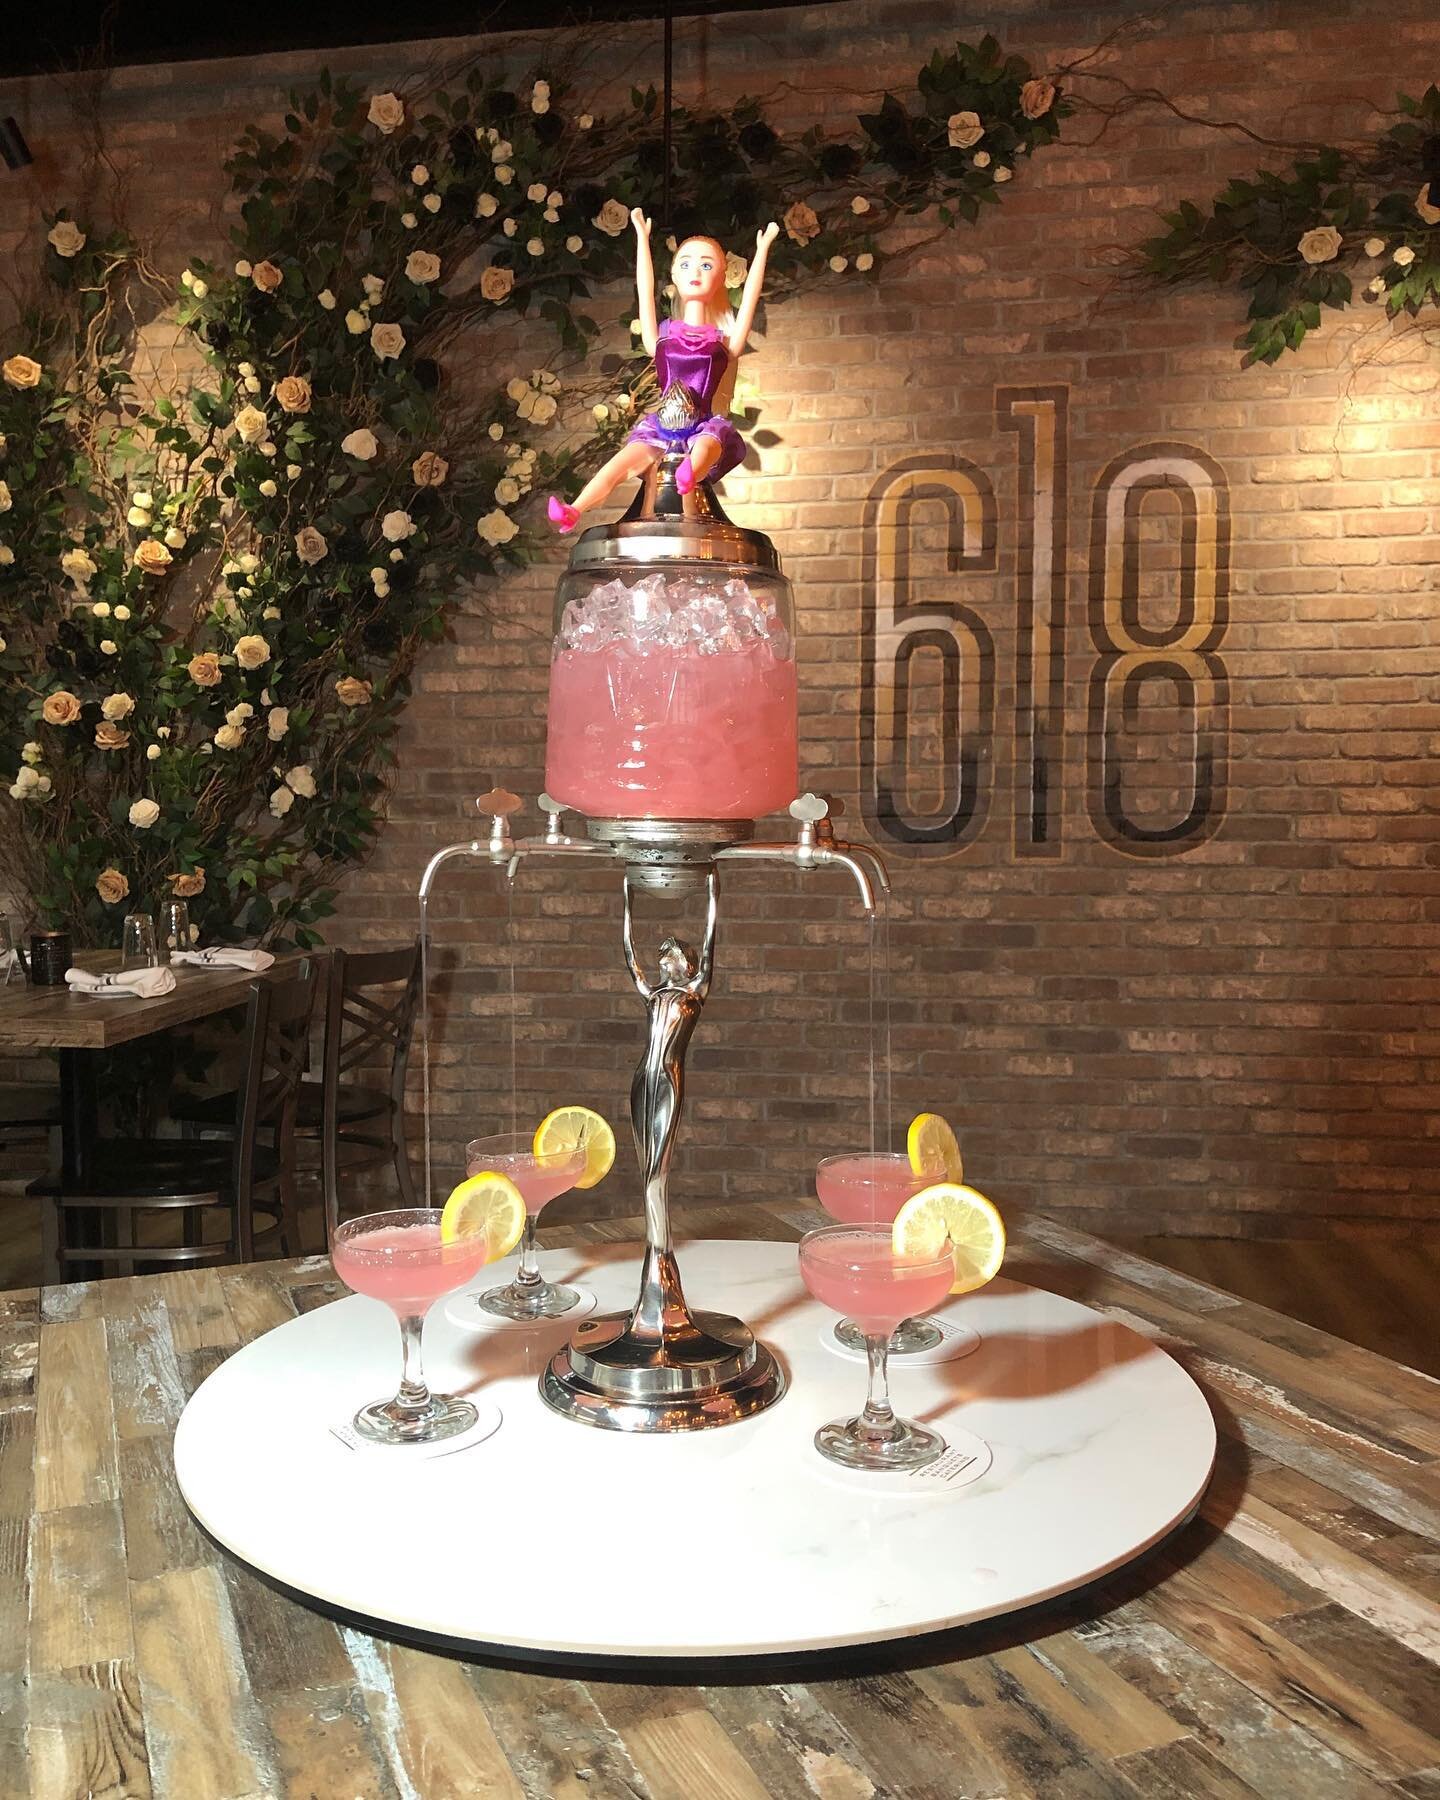 🎶 I&rsquo;m a Barbie girl, in a.. 🎶 

Barbie World 🌎 
Vodka | Passoa Passionfruit | Pineapple  Lemon

FOUNTAIN ⛲️ COCKTAILS
✨Now available at 618!✨

6 servings of the most delicious and innovative cocktails to share table side 

Grab your friends 